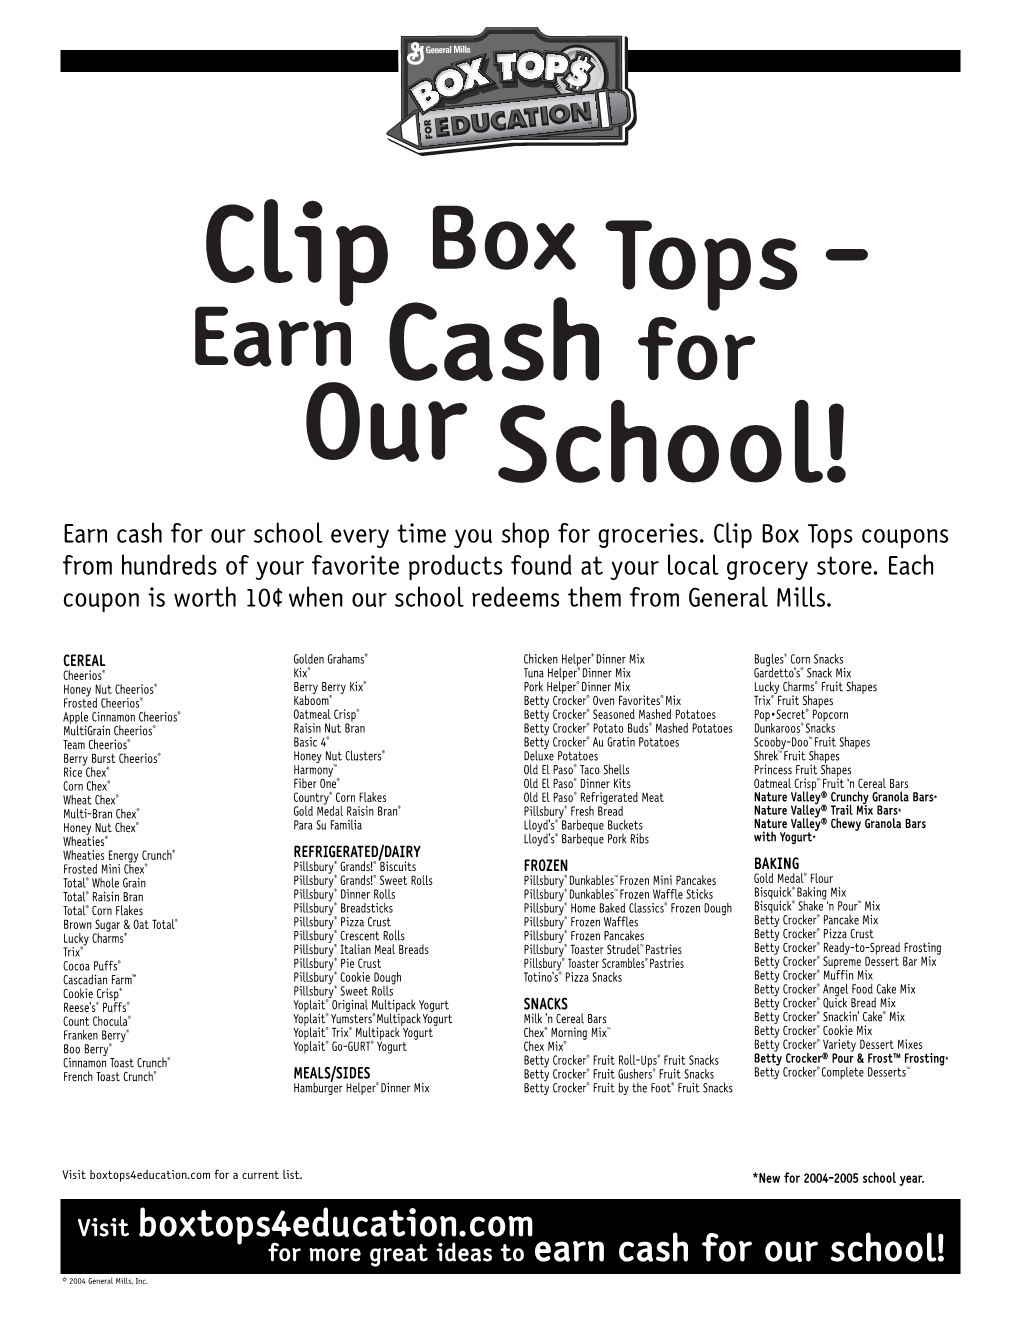 Our School! Earn Cash for Our School Every Time You Shop for Groceries